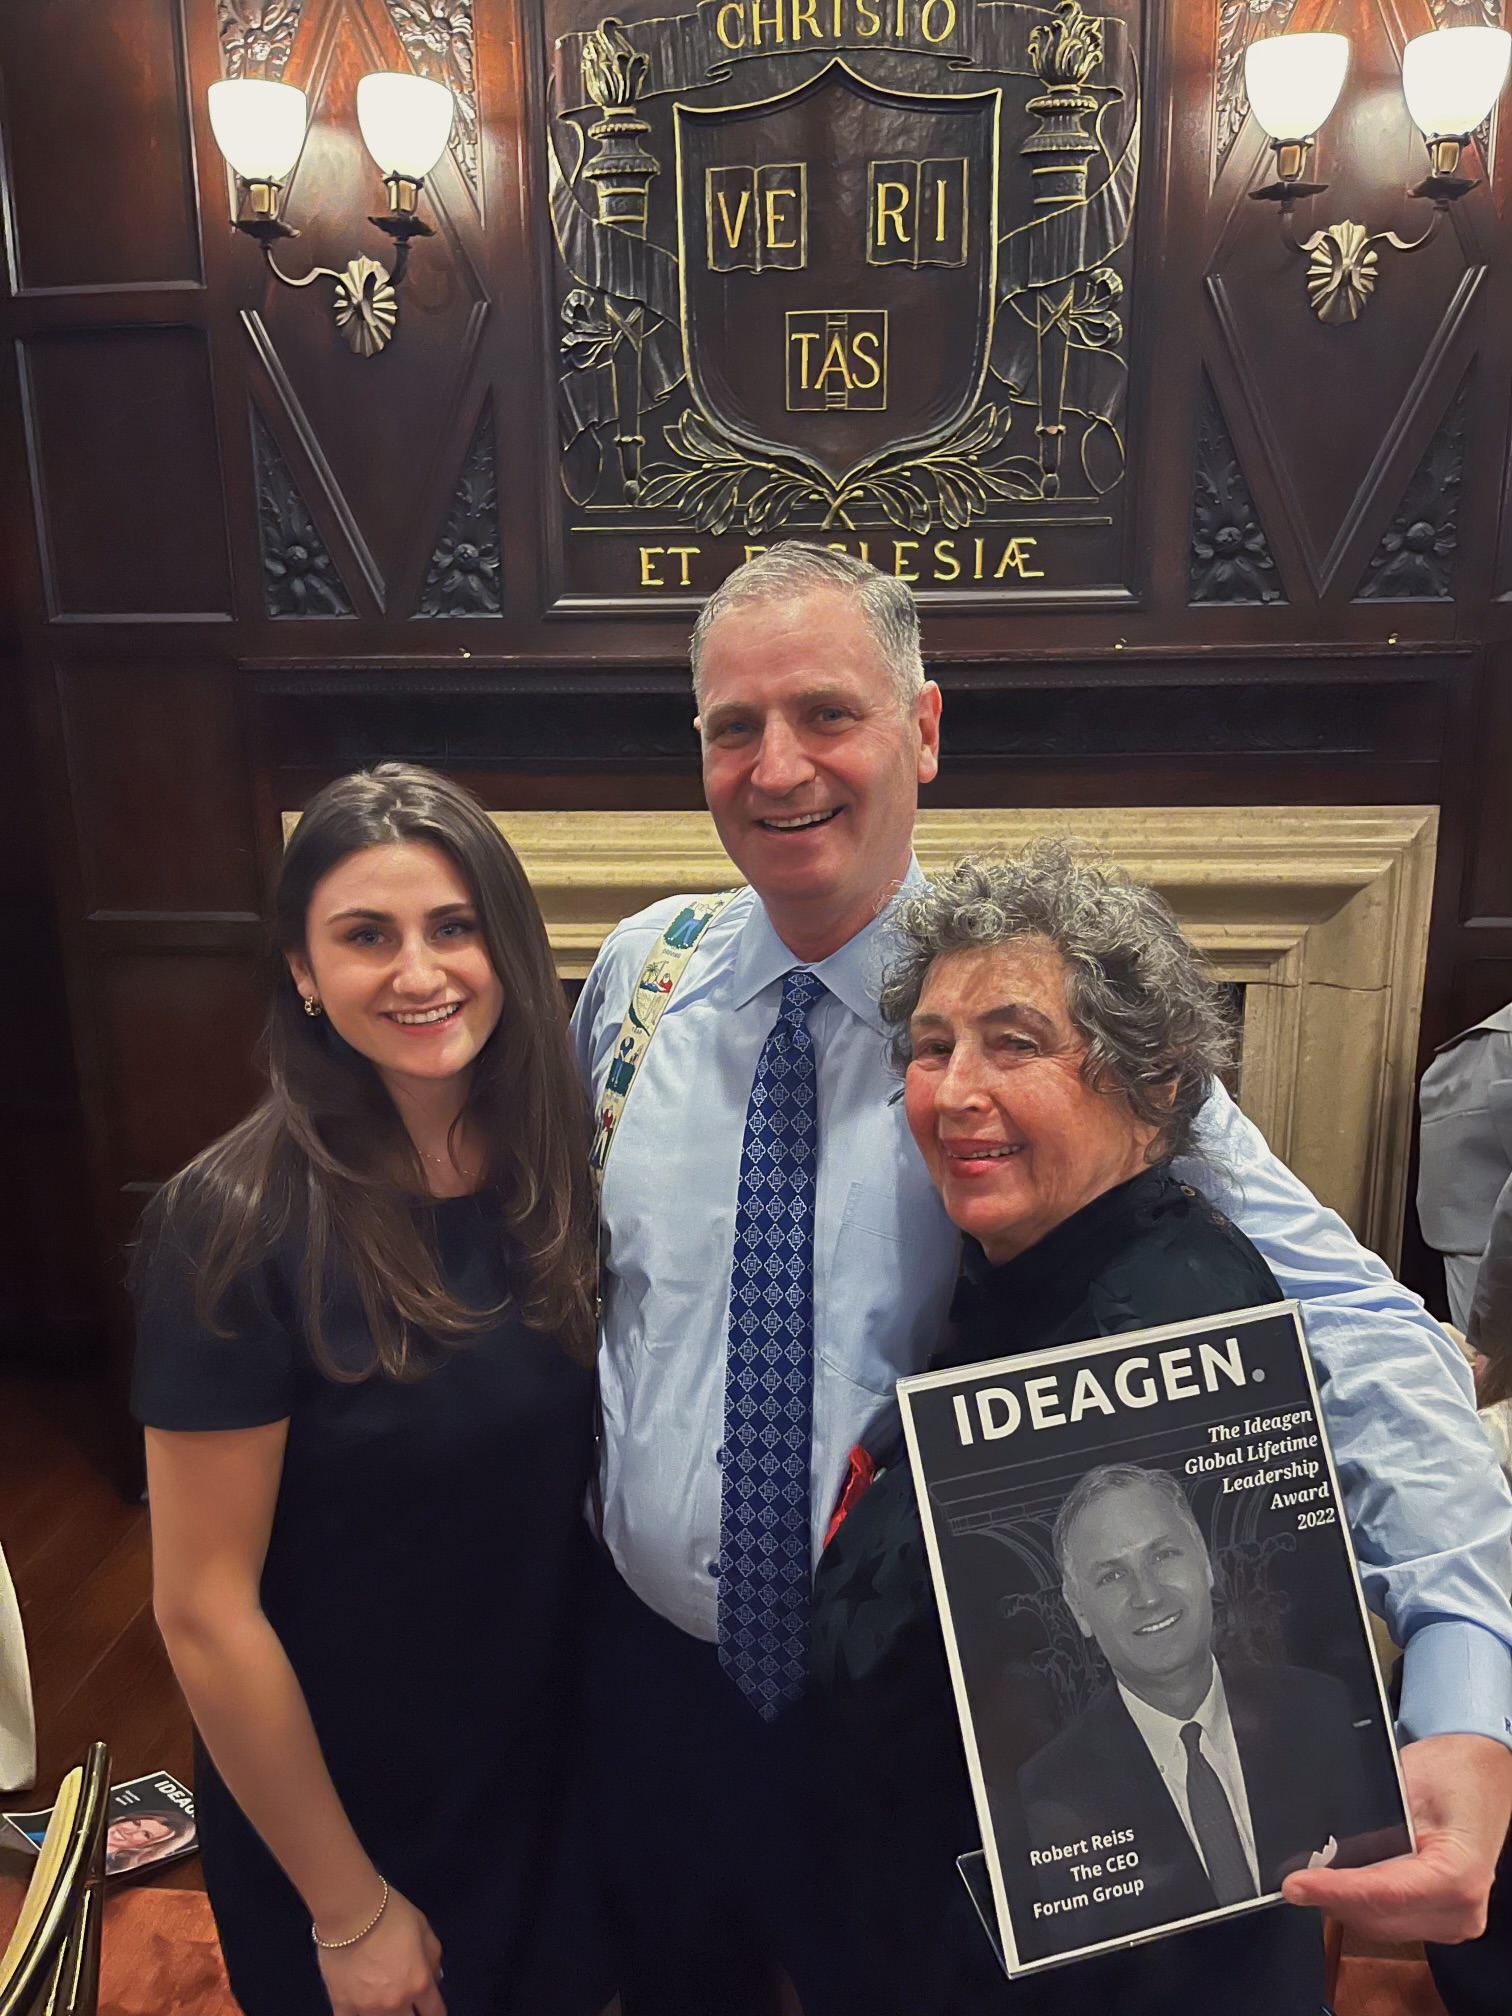 Robert Reiss, CEO of The CEO Forum Group, with daughter, mother, and award at the Harvard Club for Ideagen Global Lifetime Leadership Event